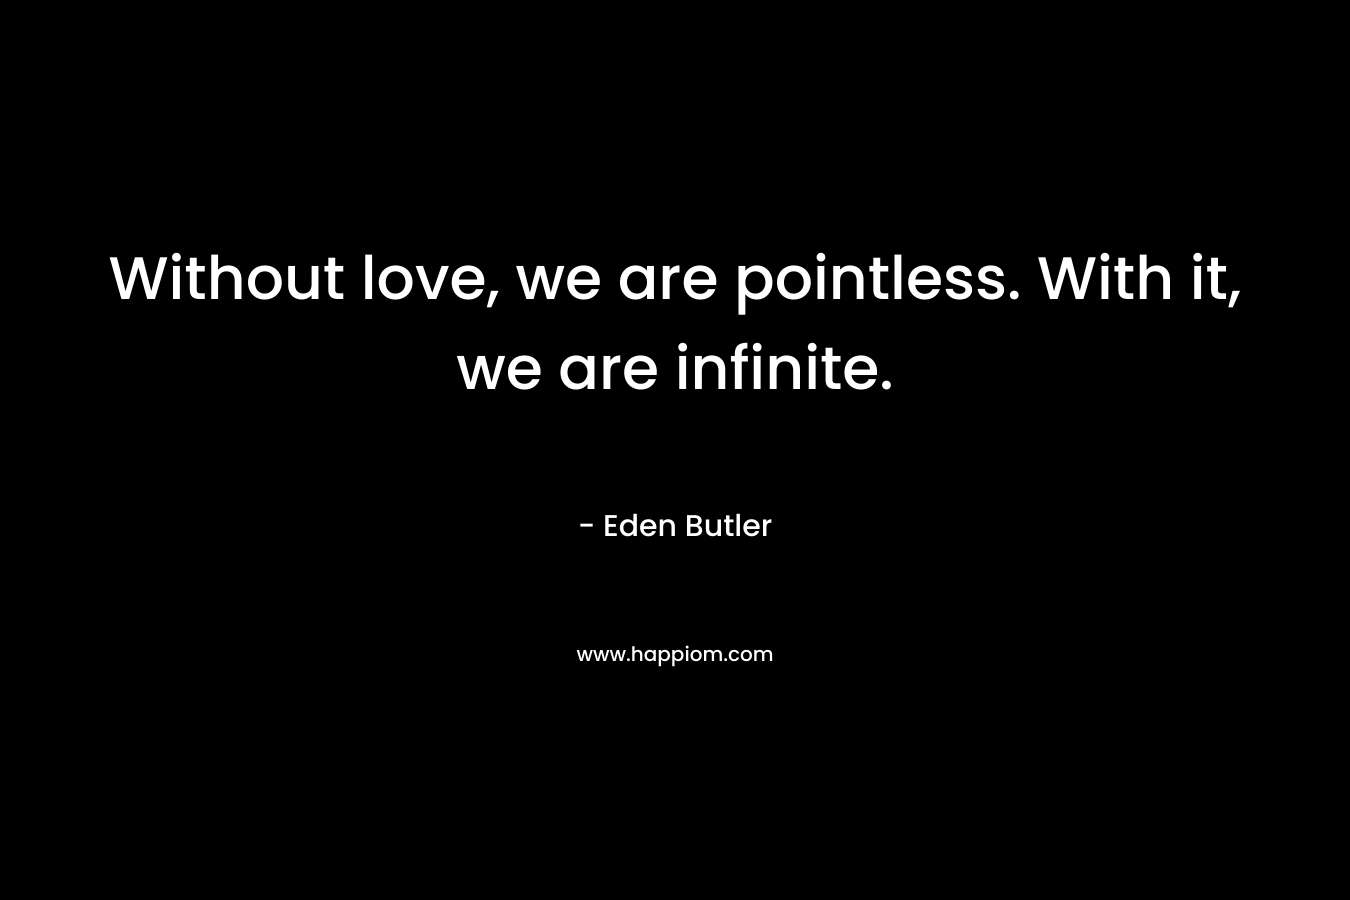 Without love, we are pointless. With it, we are infinite.